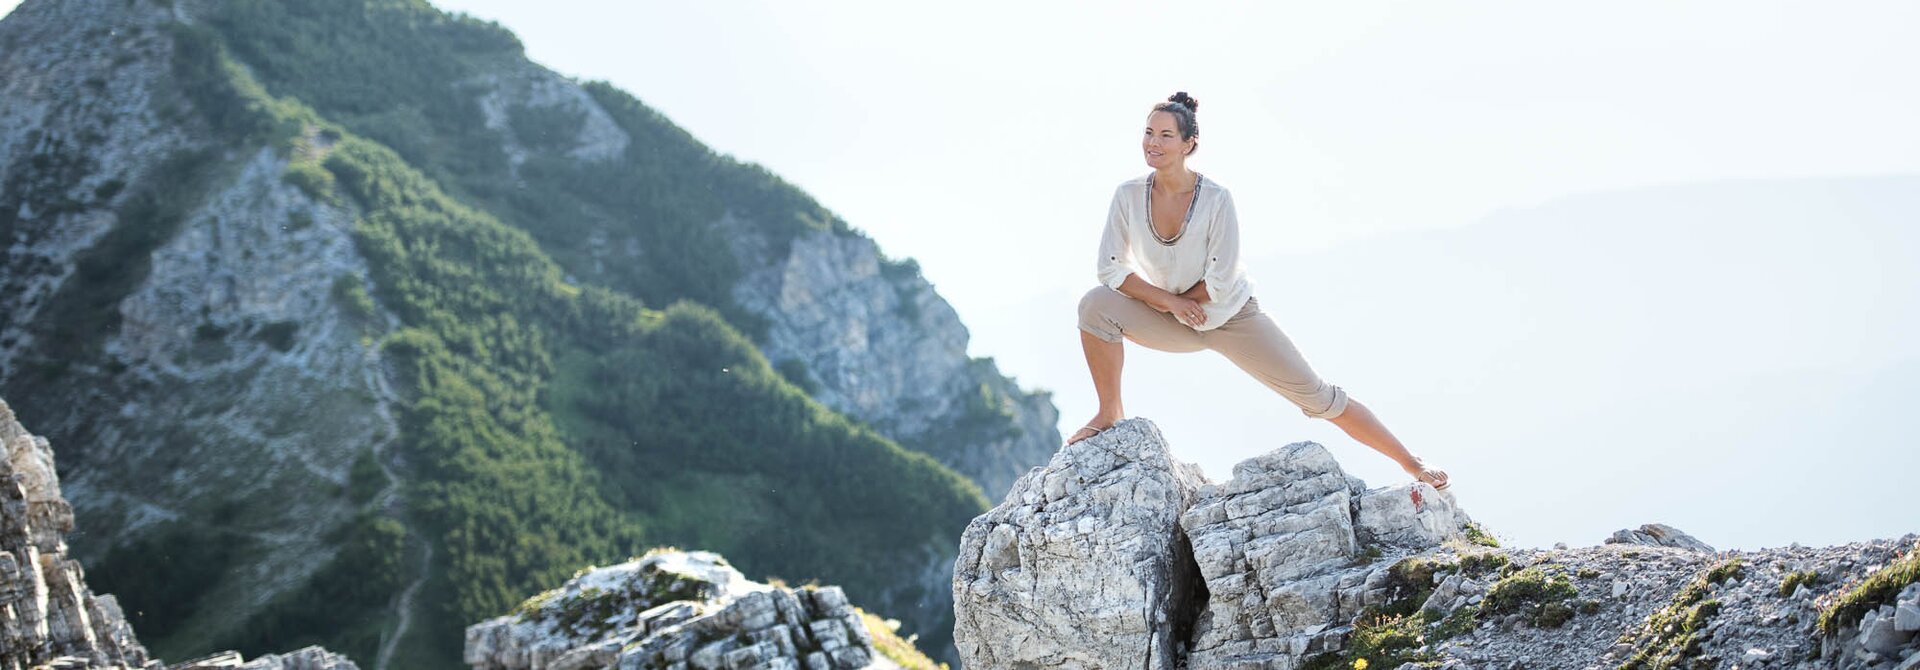 Yoga in the Mountains | Best Wellnesshotels in South Tyrol & Austria